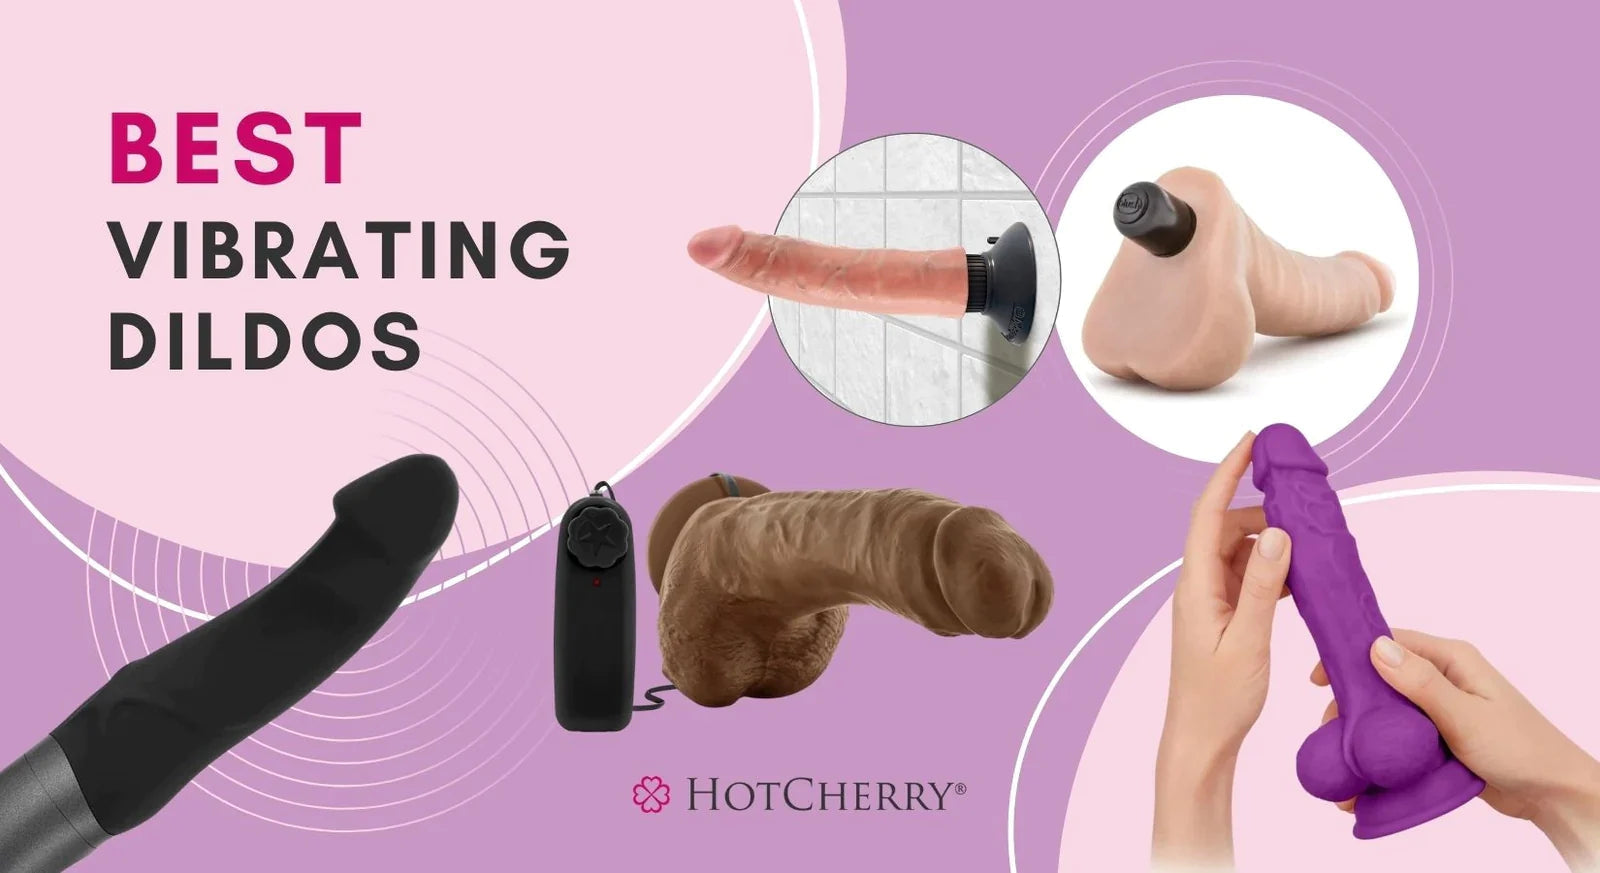 Best Vibrating Dildos: Realistic, Squirting and Rotating Dildos